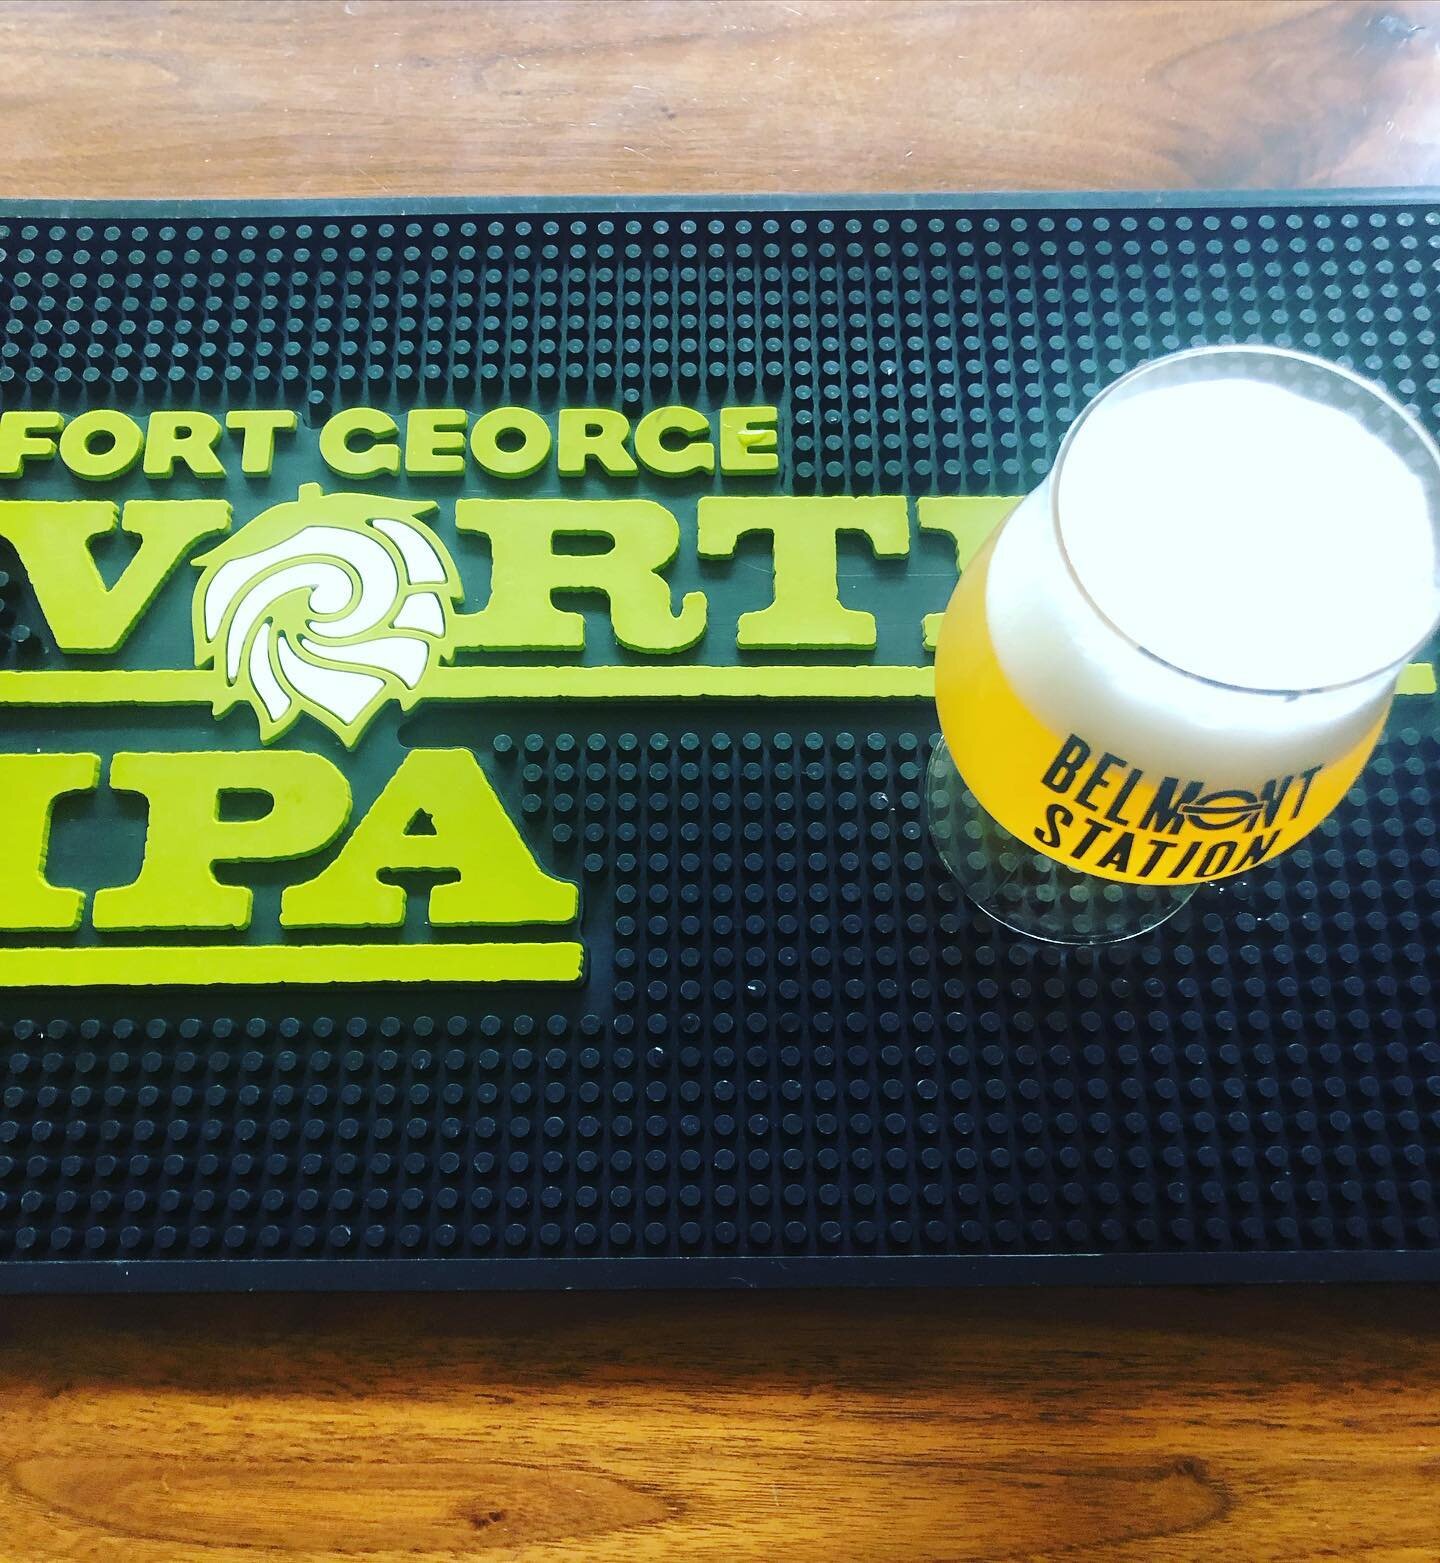 May the forth be with you. We tapped Fort George&rsquo;s Java the Hop to celebrate the occasion. Come enjoy this coffee IPA and talk about Kyber Crystals. Cheers!
.
.
.
.
#maytheforthbewithyou #craftbeer #supportsmallbusiness #belmontstationpdx #drin